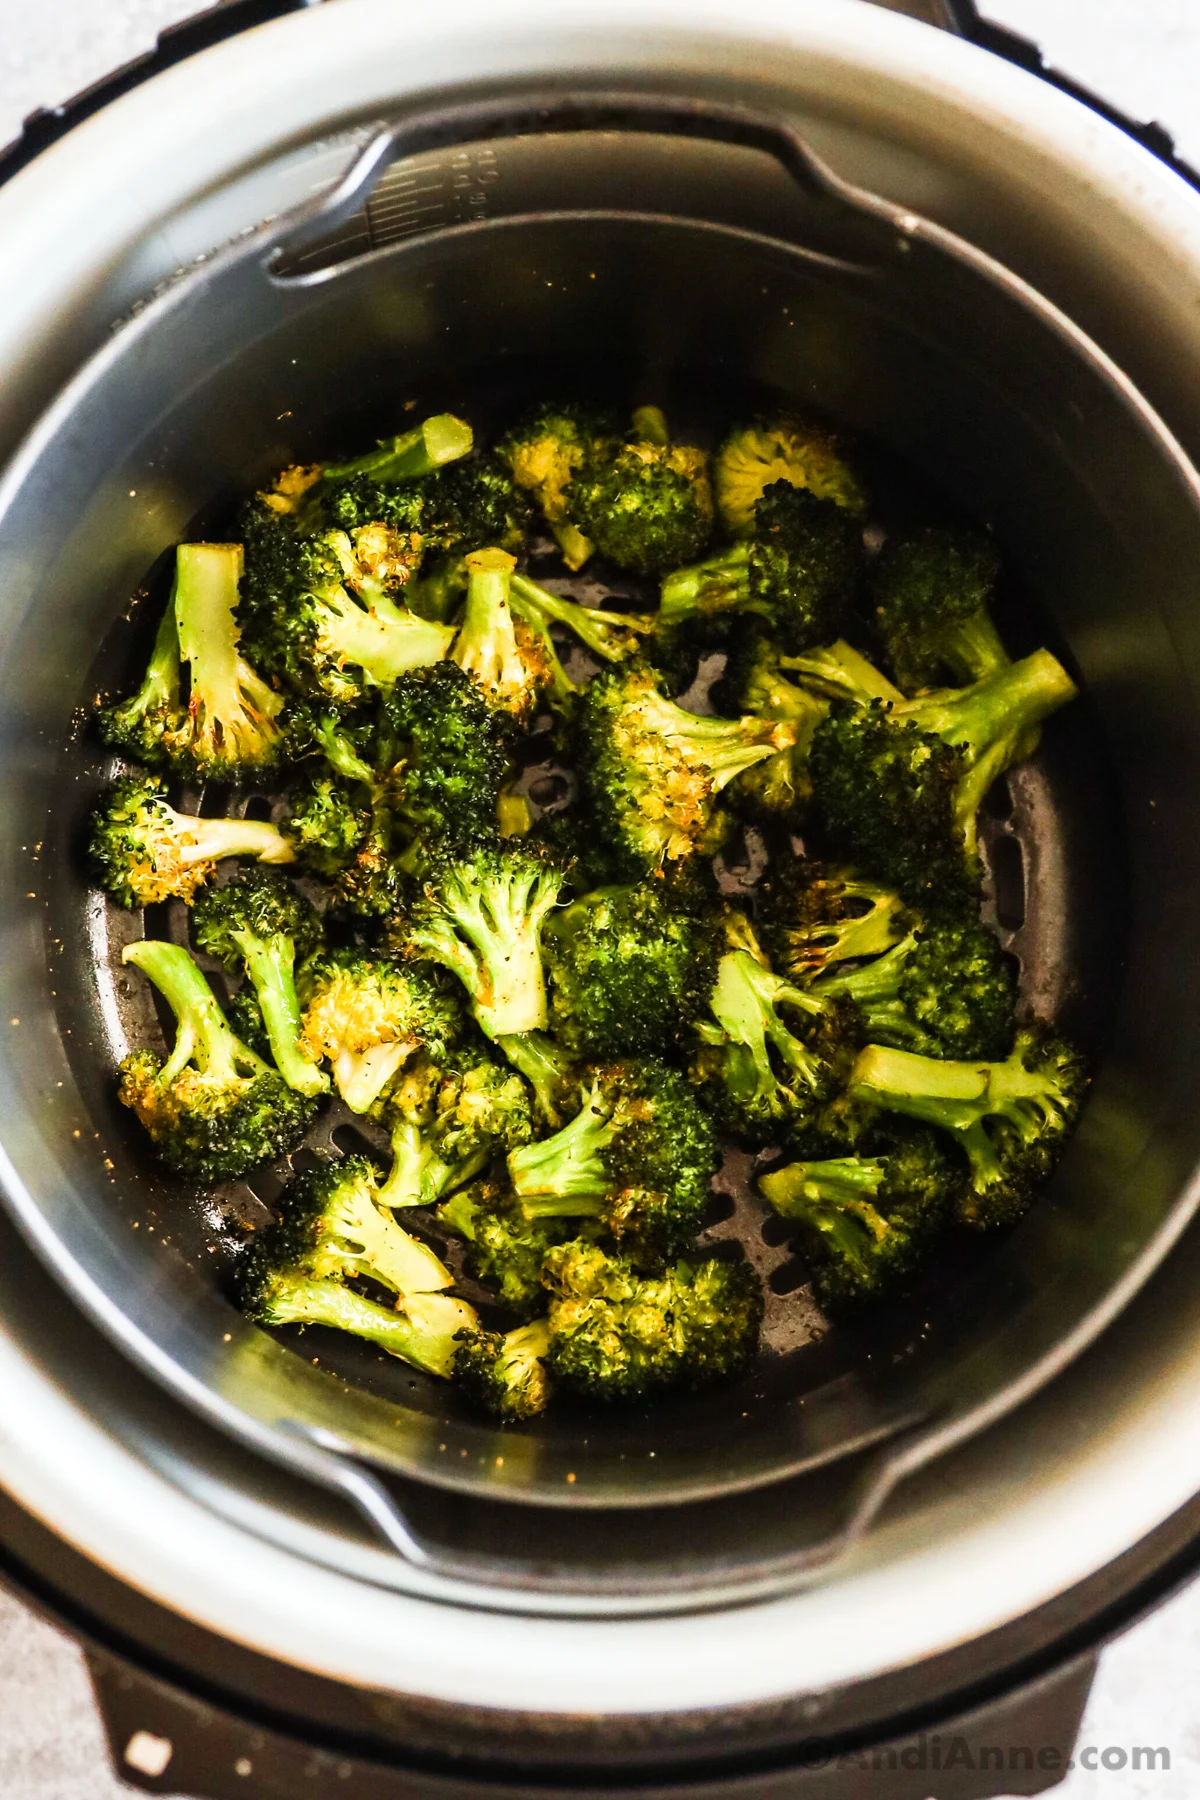 Looking into broccoli air fryer with broccoli florets.